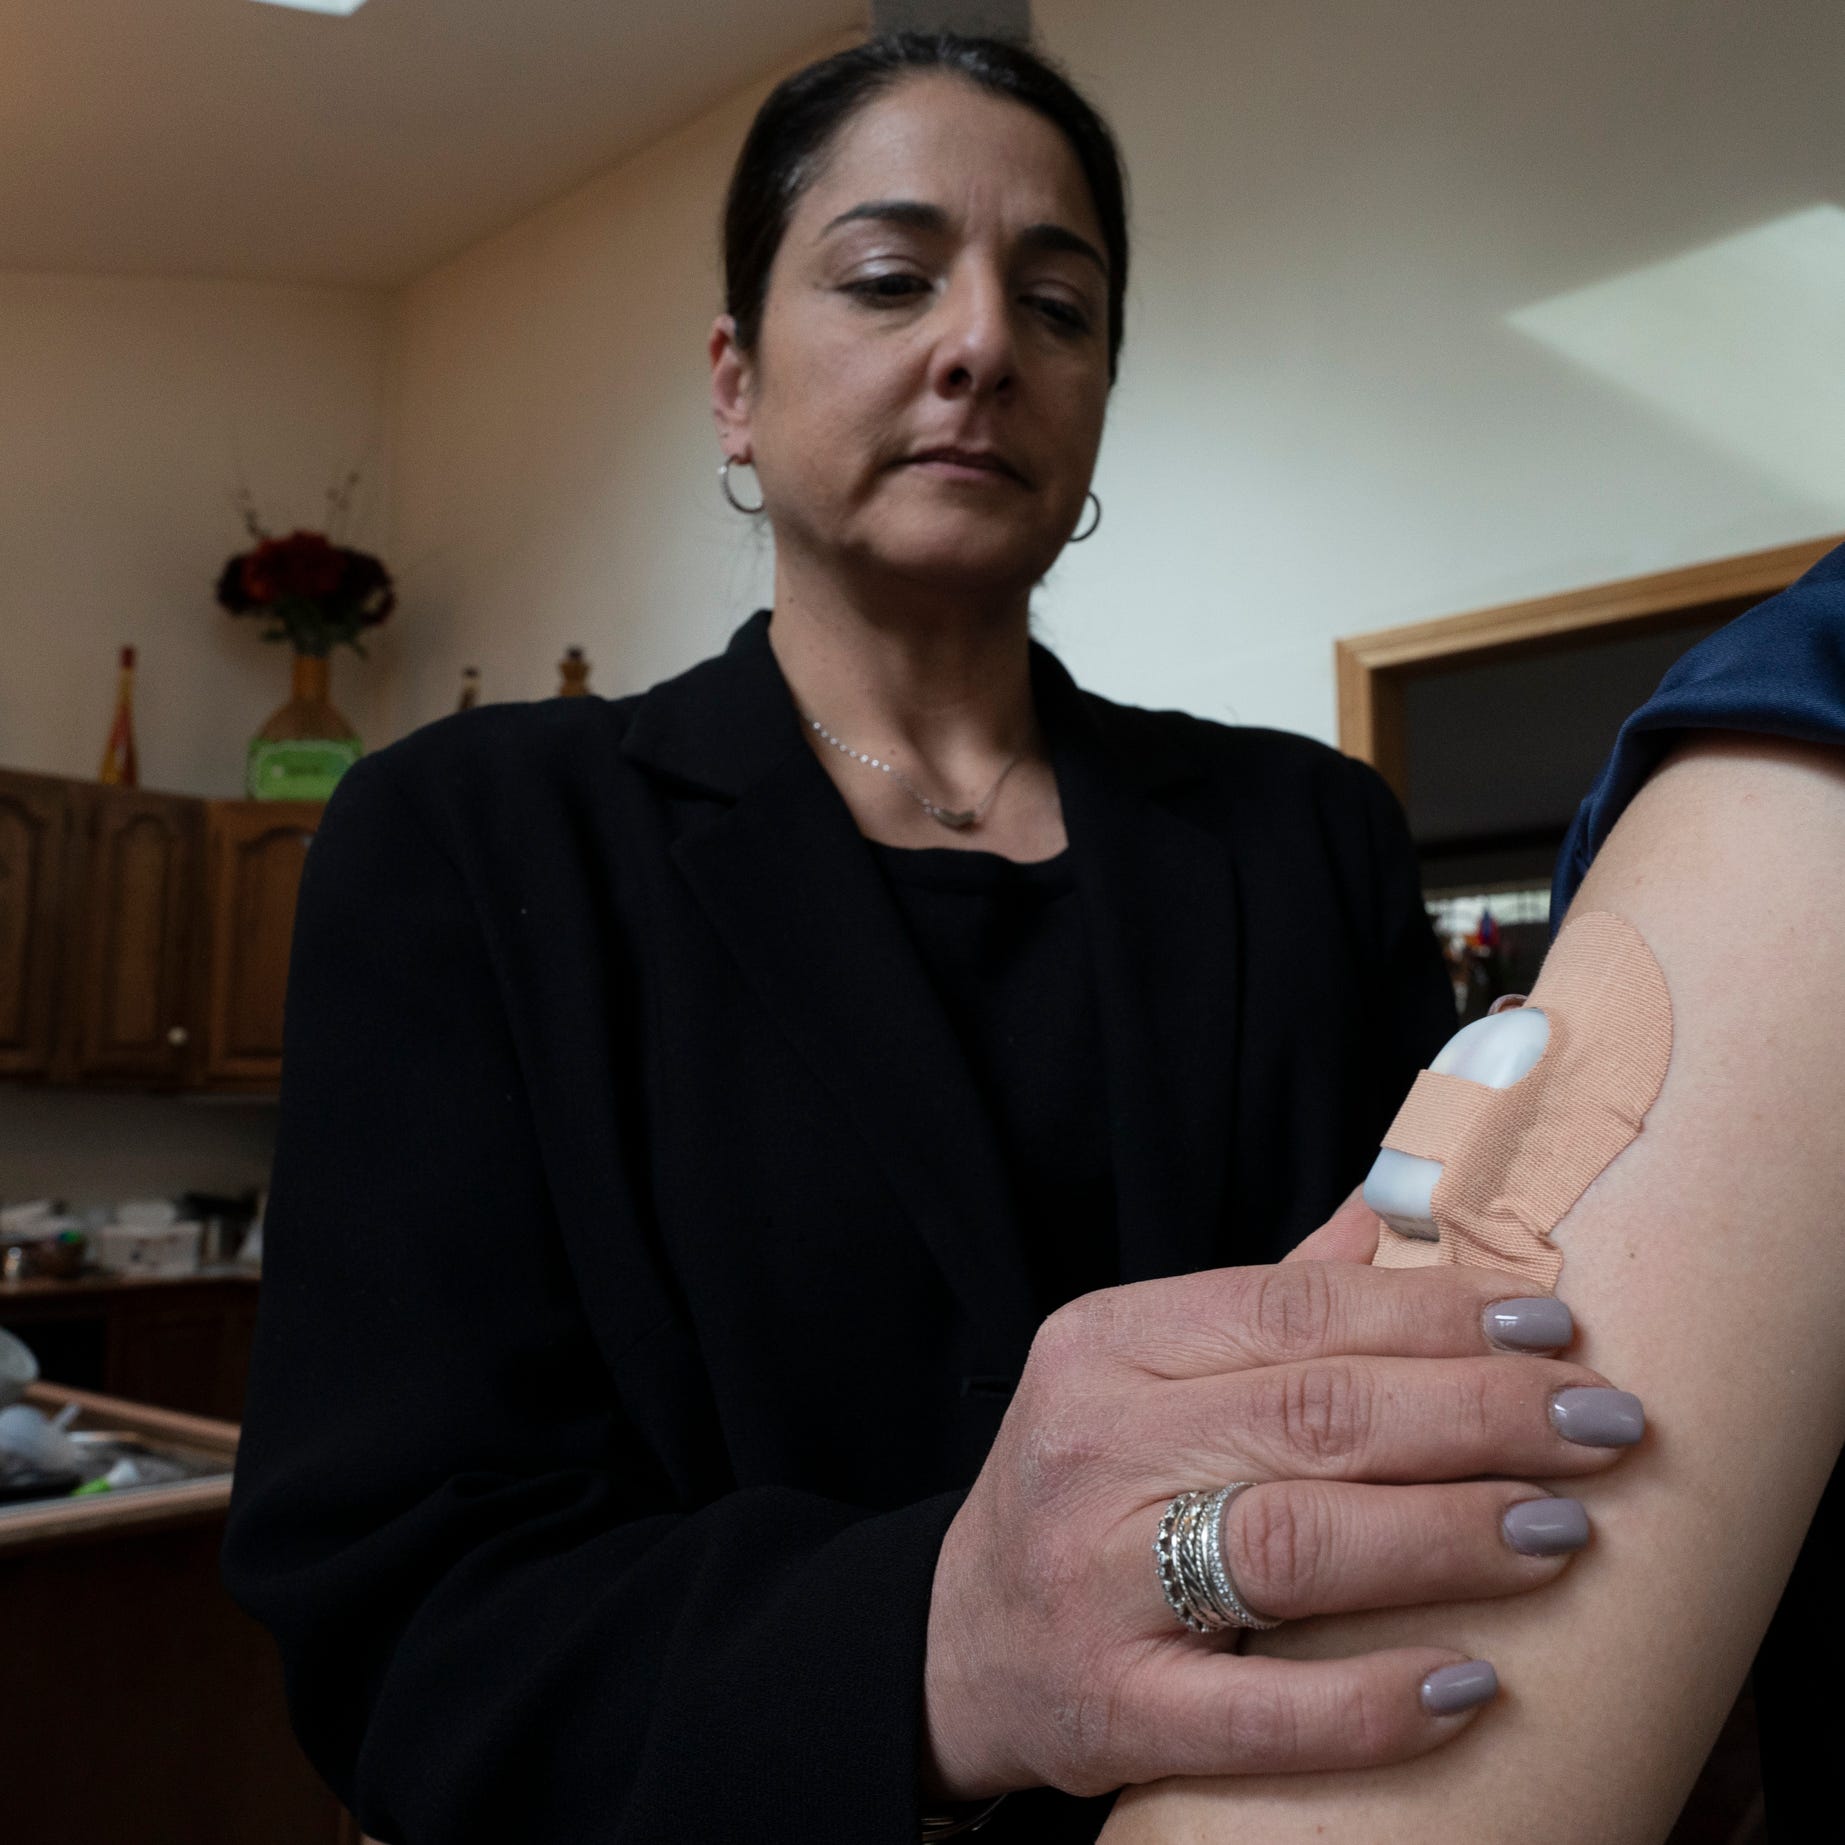 Mar 24, 2023; Millwood, NY, USA; Maria Chiodi of Millwood, NY, treats her 12-year-old son's Type 1 diabetes with an Omnipod 5 insulin pump. While the three largest makers of insulin have announced plans to slash prices, the cost of the medication is just one of many expenses people with diabetes must cover.  A dispute between Chiodi's health insurer and the company that makes the pump leaves her with a monthly bill of $872 for his care. Mandatory Credit: John Meore-USA TODAY